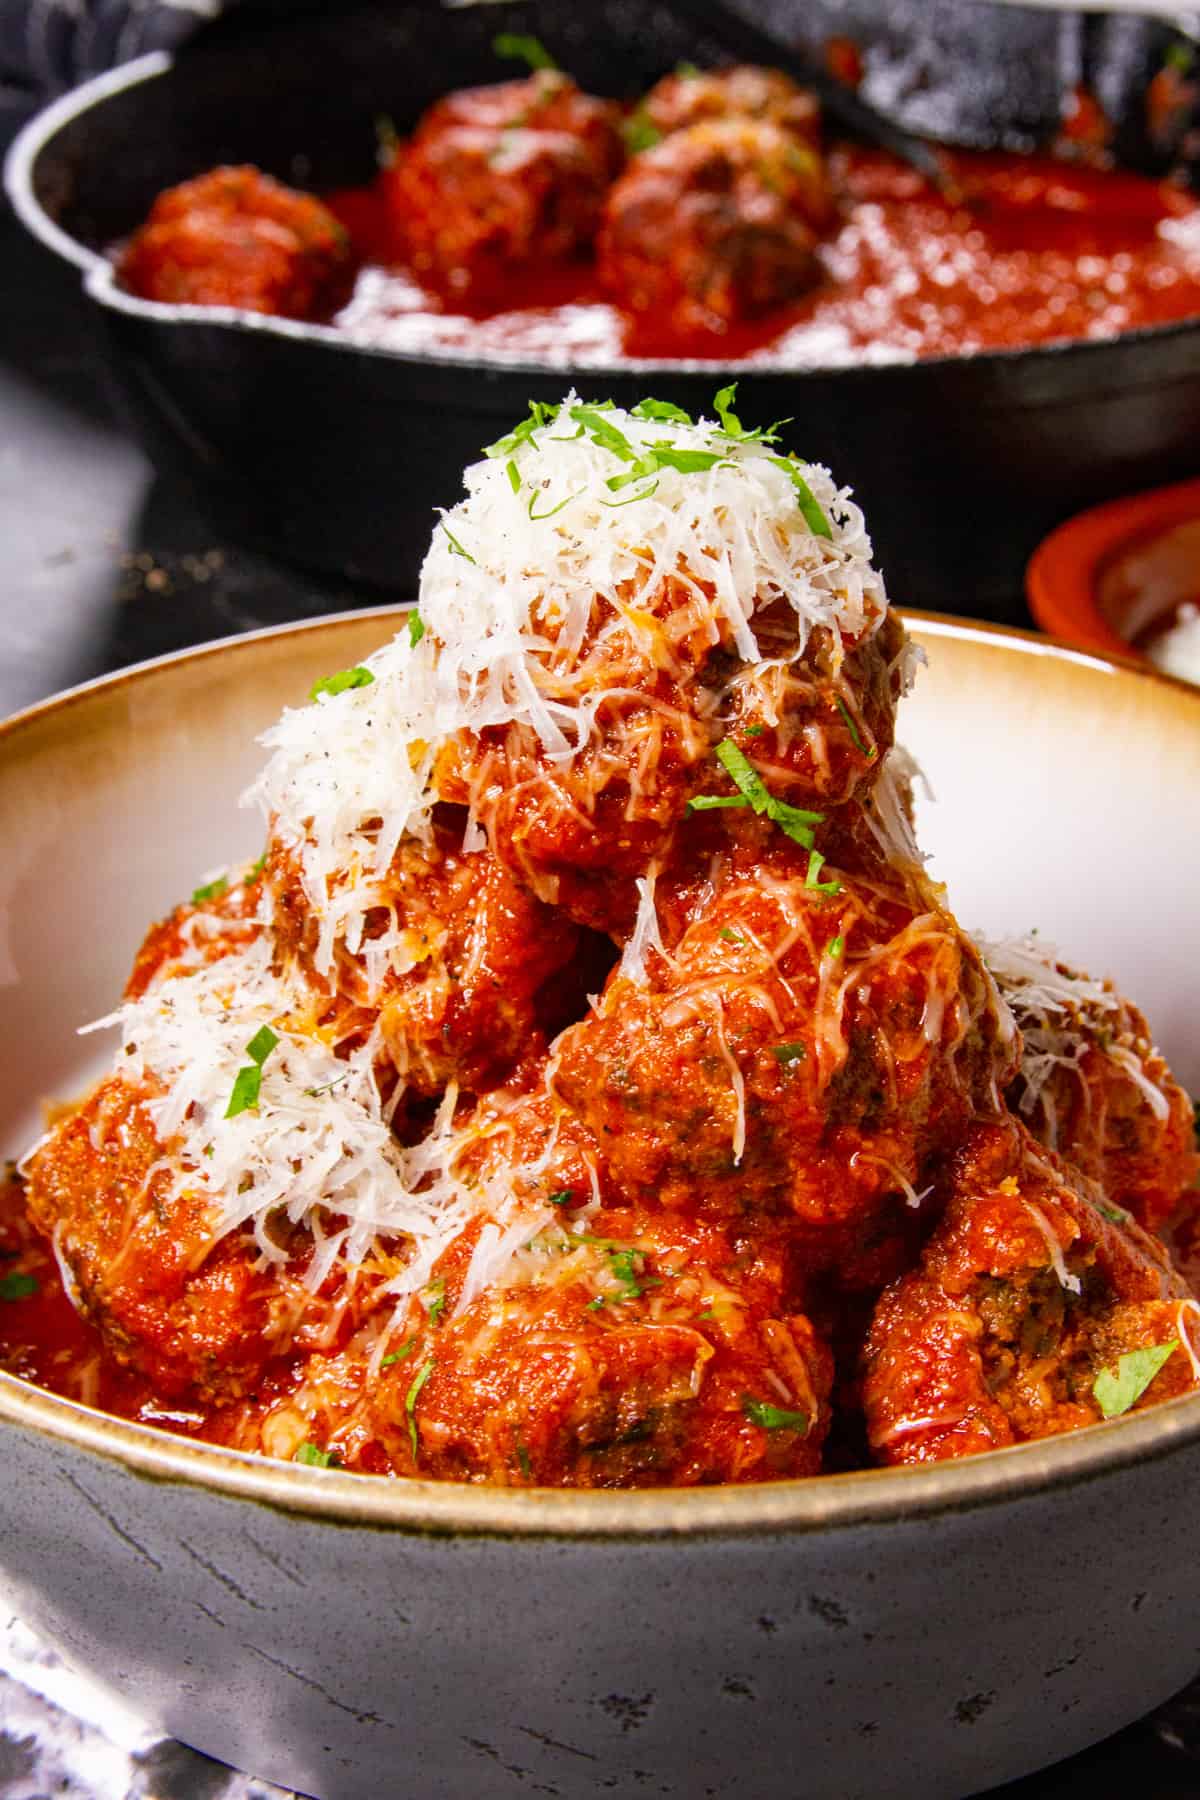 A close up of the meatballs on a plate, stacked high.